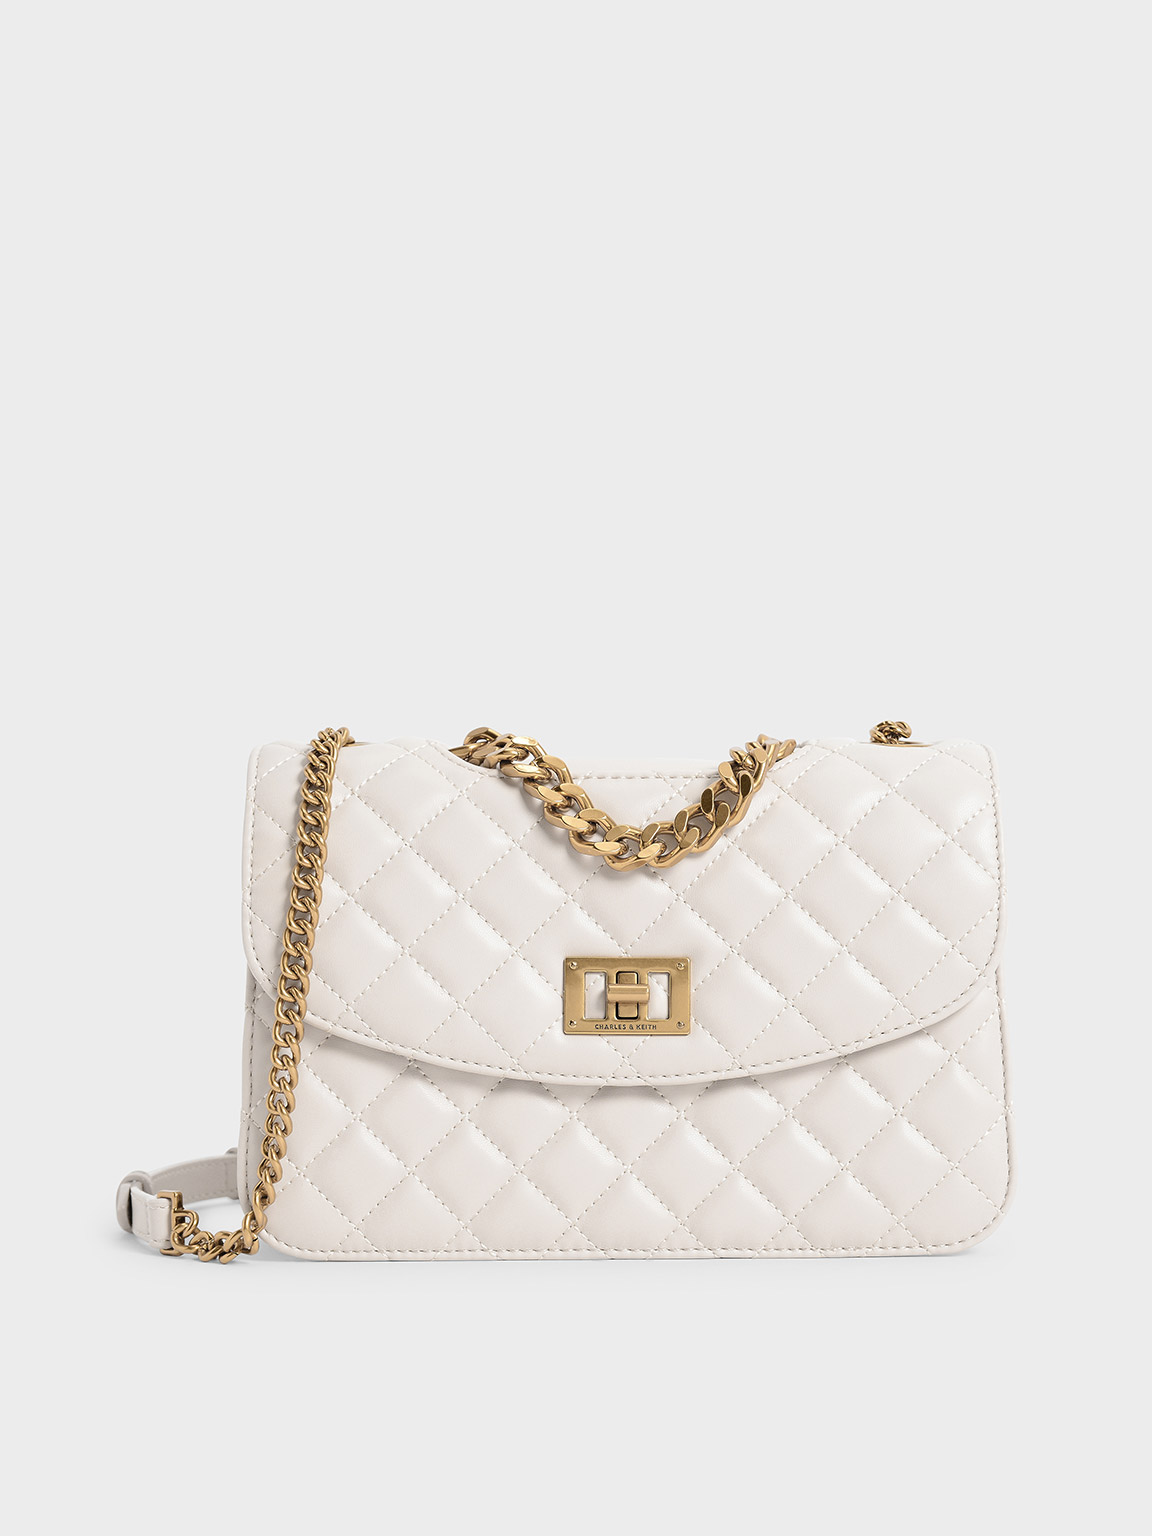 Charles & Keith - Women's Quilted Chain Bag, Ivory, S